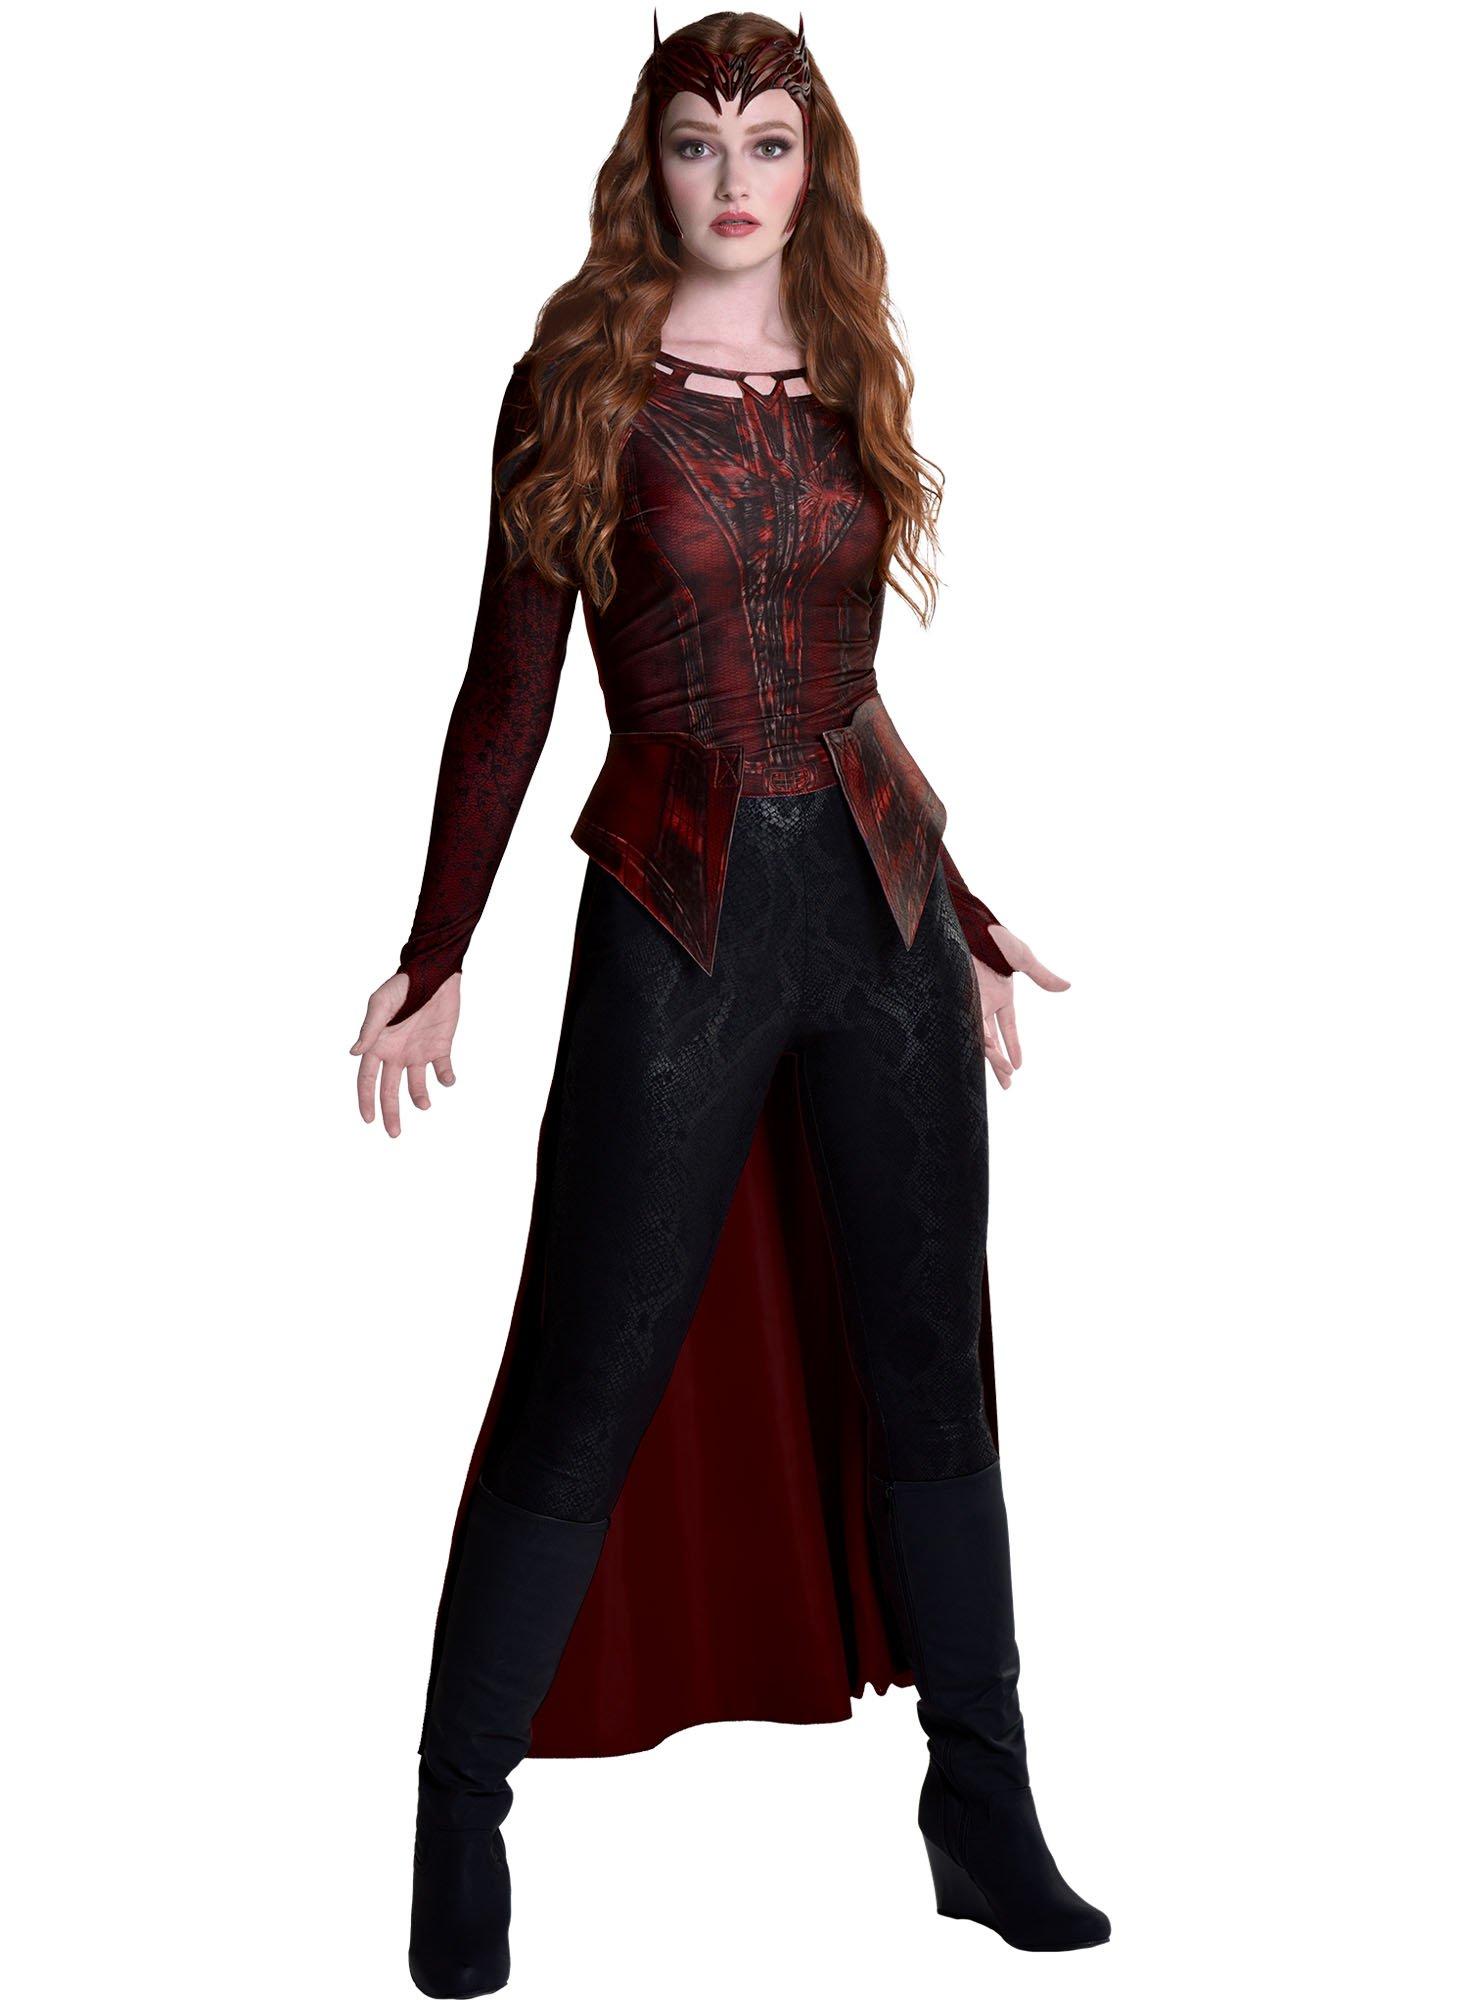 Scarlet Witch costume adult size (small) blog.knak.jp